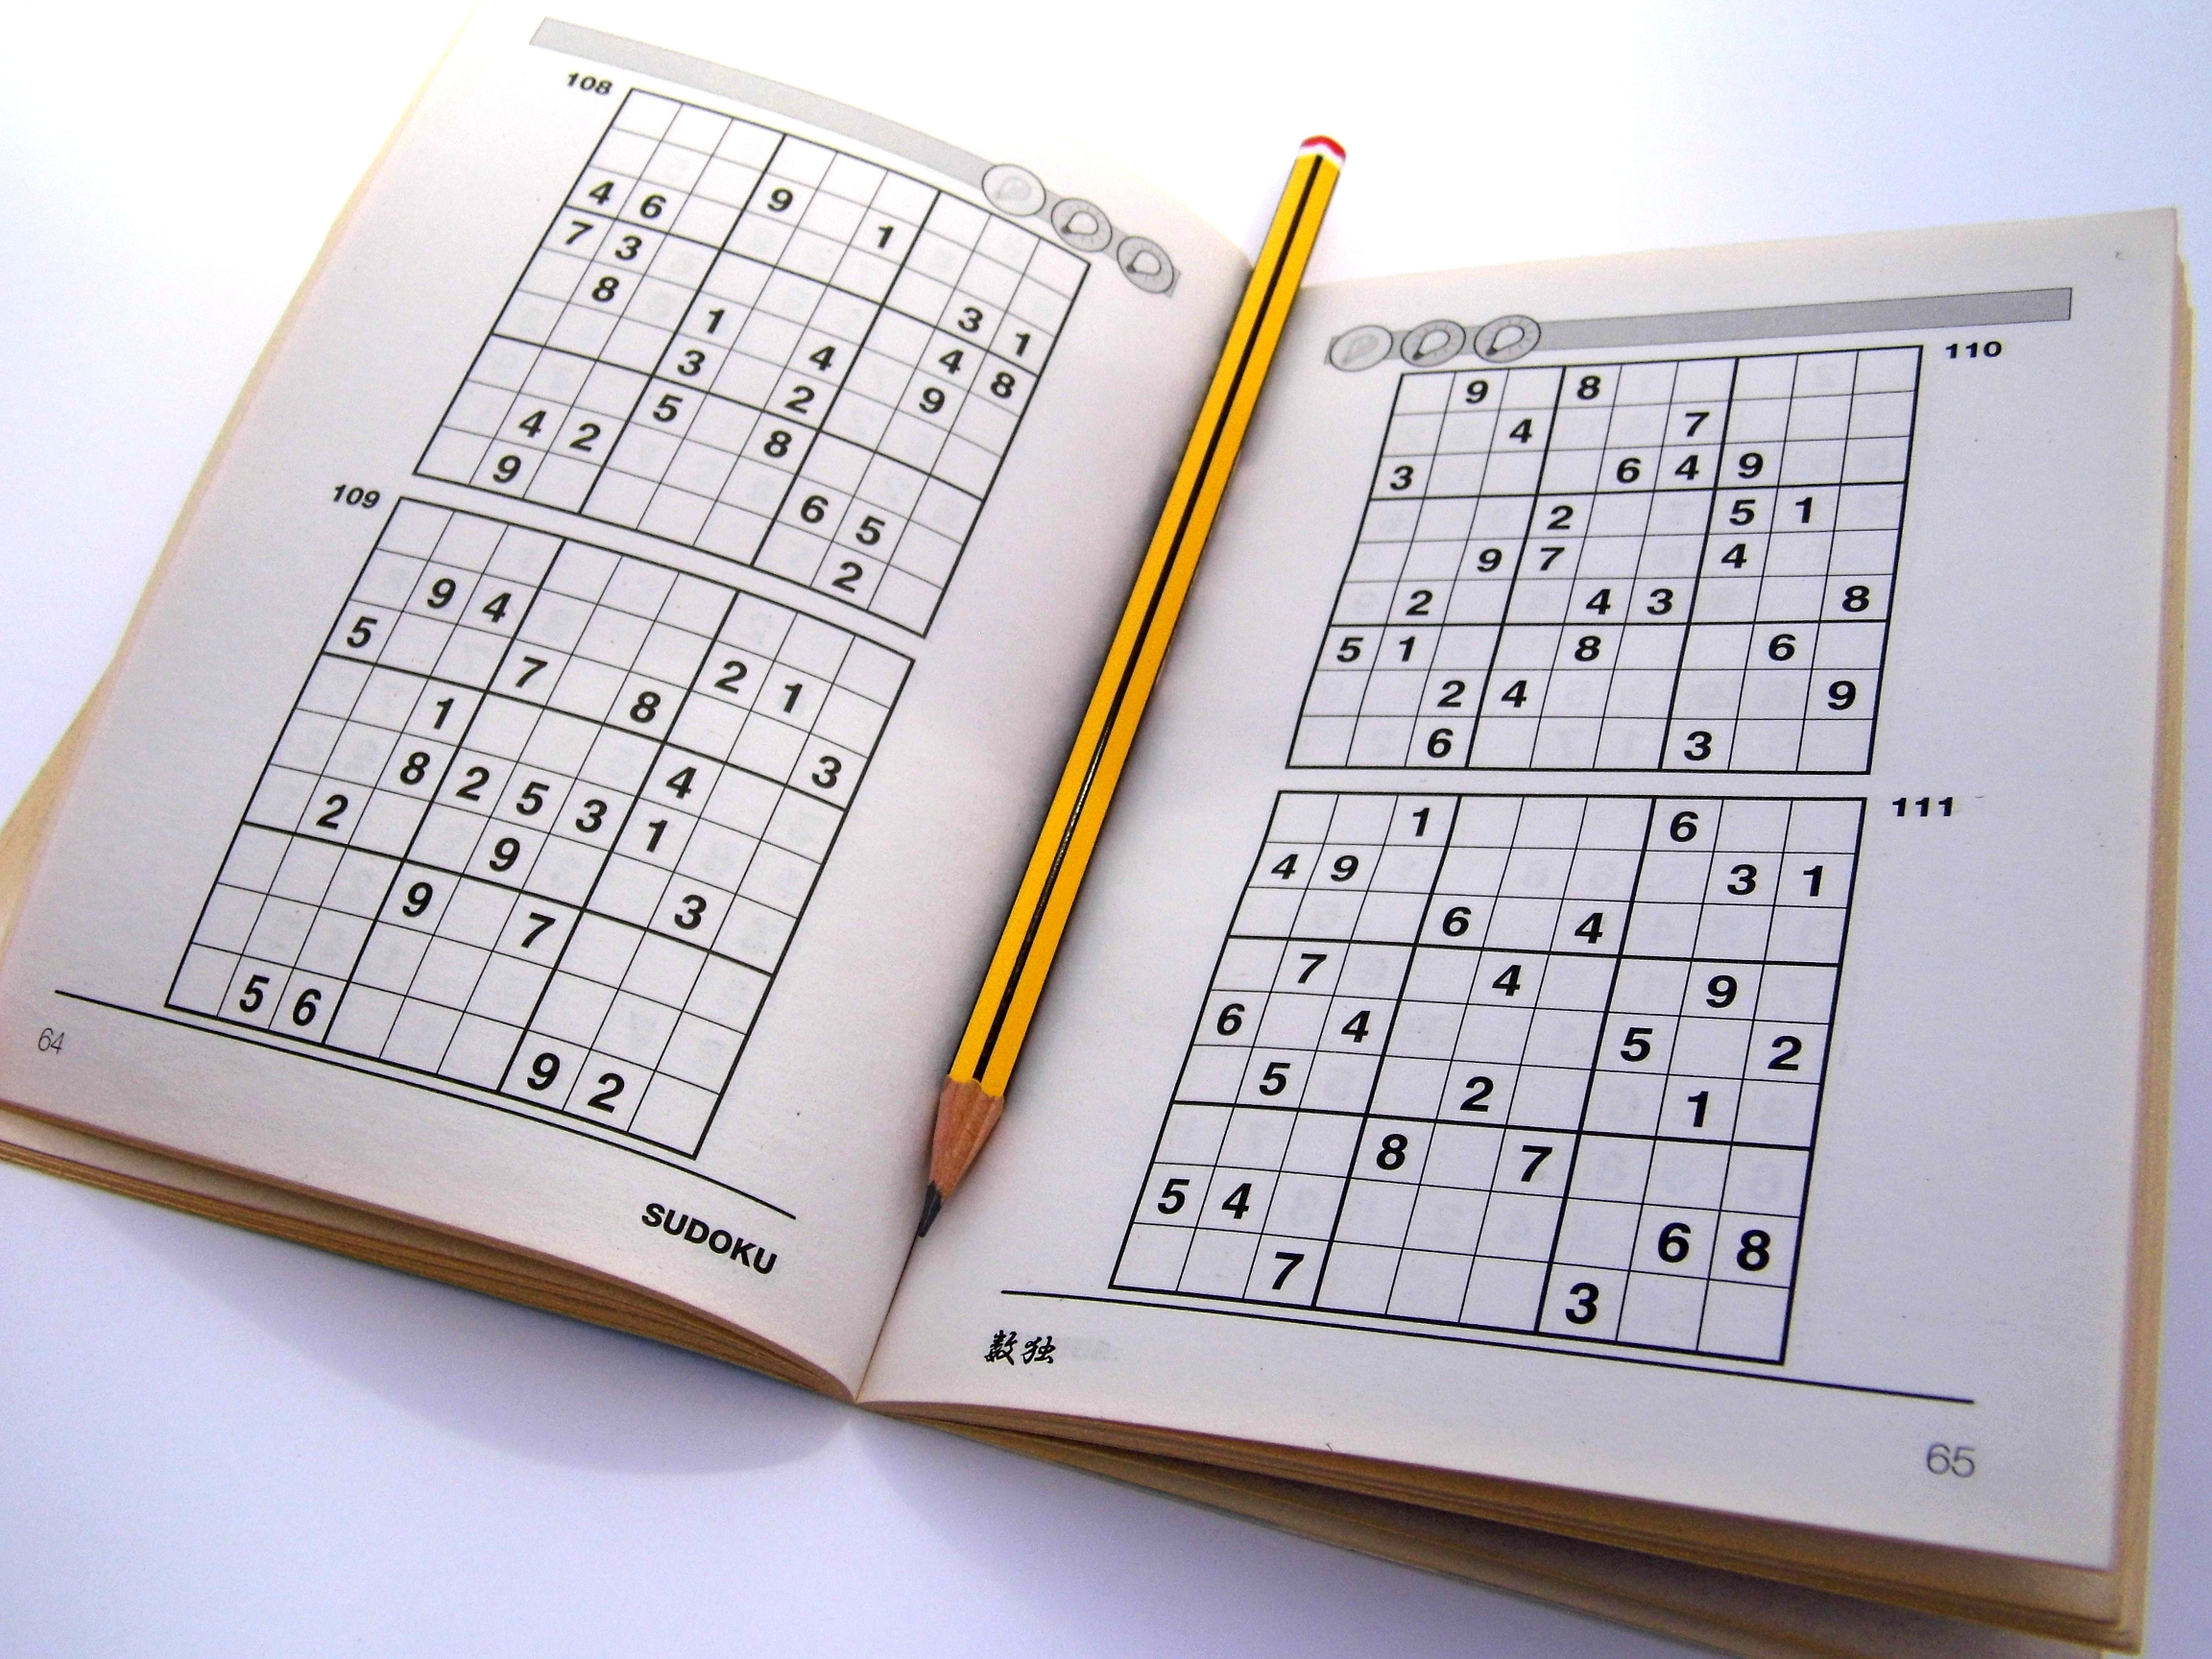 Archive Puzzles – 24 Hard Sudoku Puzzles – Books 1 To 10